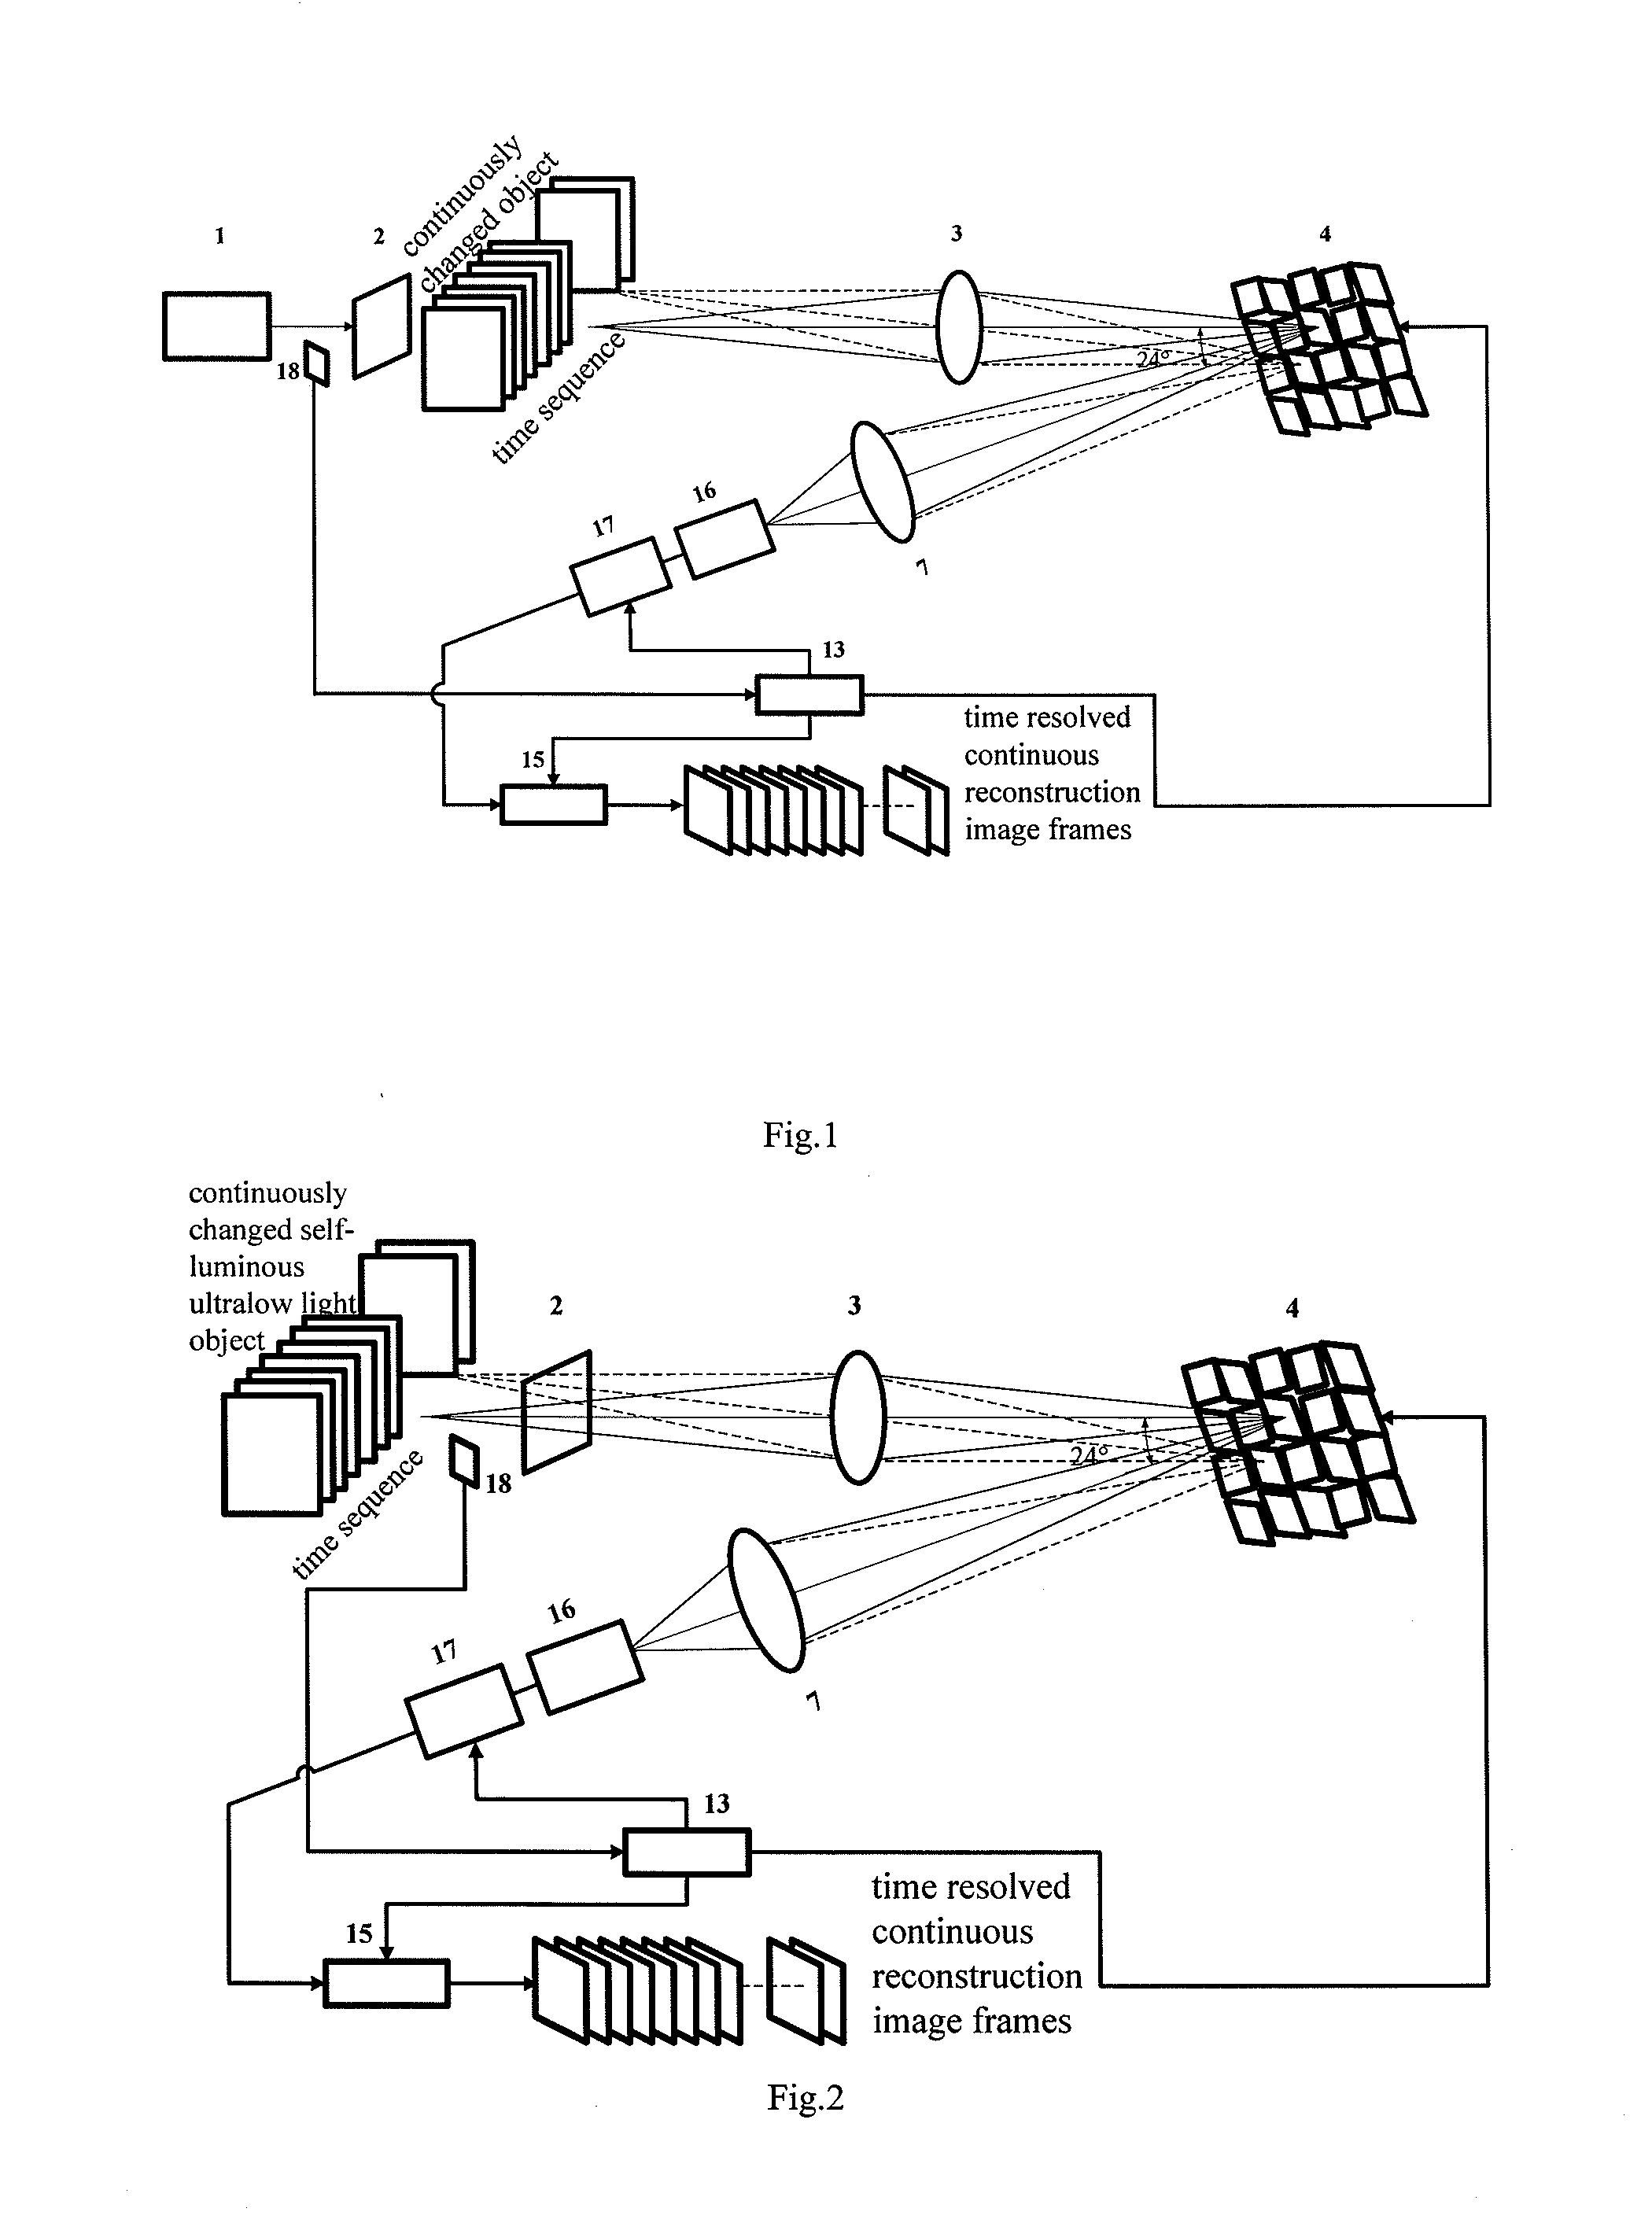 Time-Resolved Single-Photon or Ultra-Weak Light Multi-Dimensional Imaging Spectrum System and Method